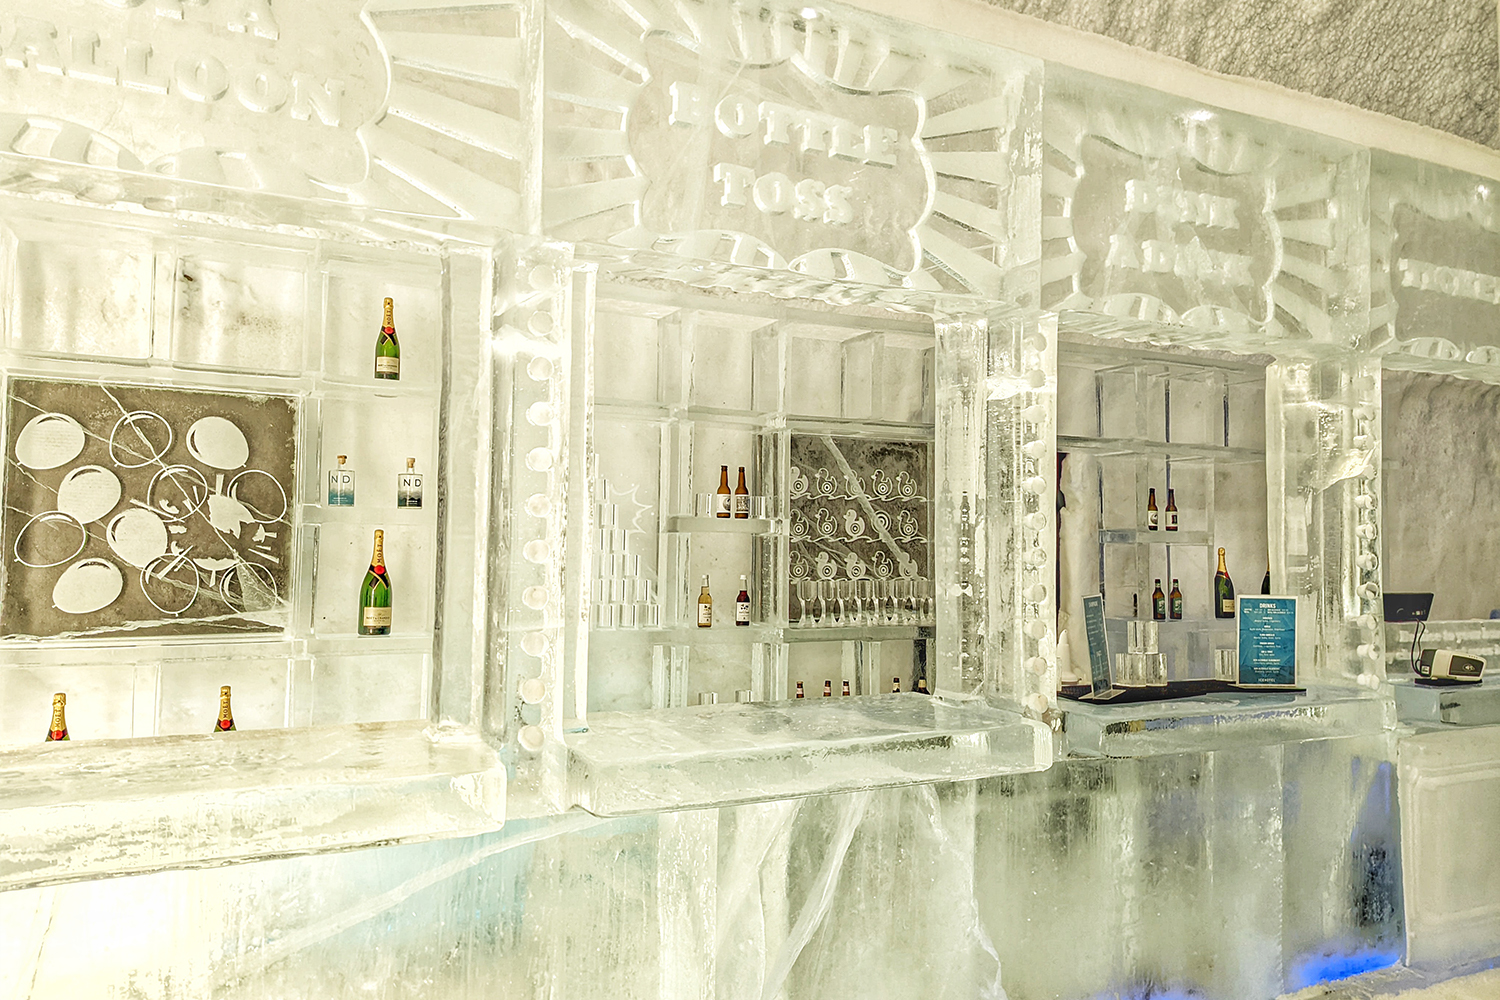 An ice bar with games at the Icehotel in Sweden's Lapland region